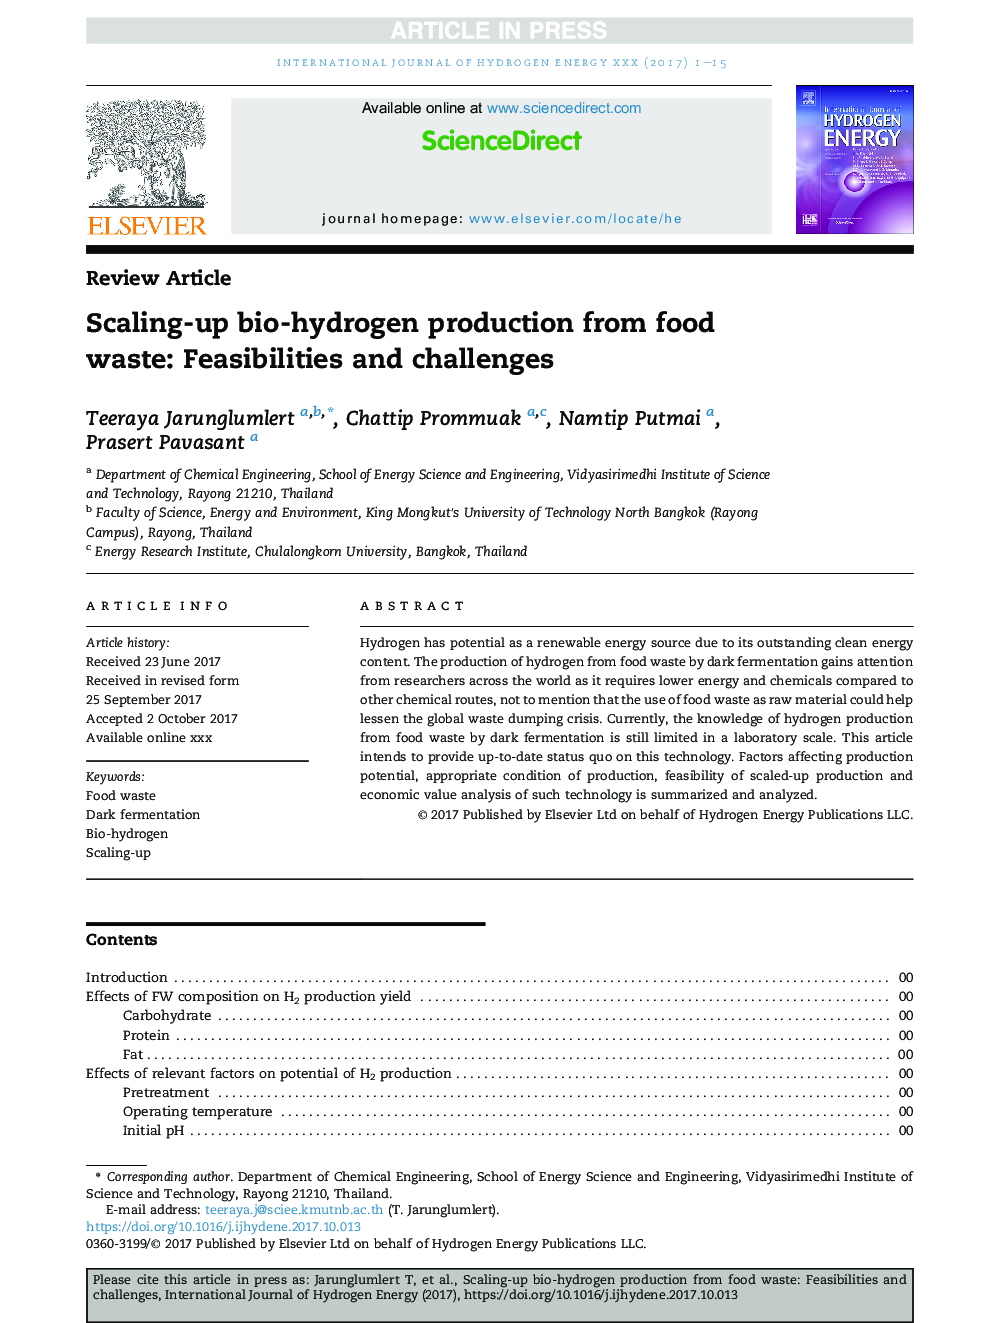 Scaling-up bio-hydrogen production from food waste: Feasibilities and challenges